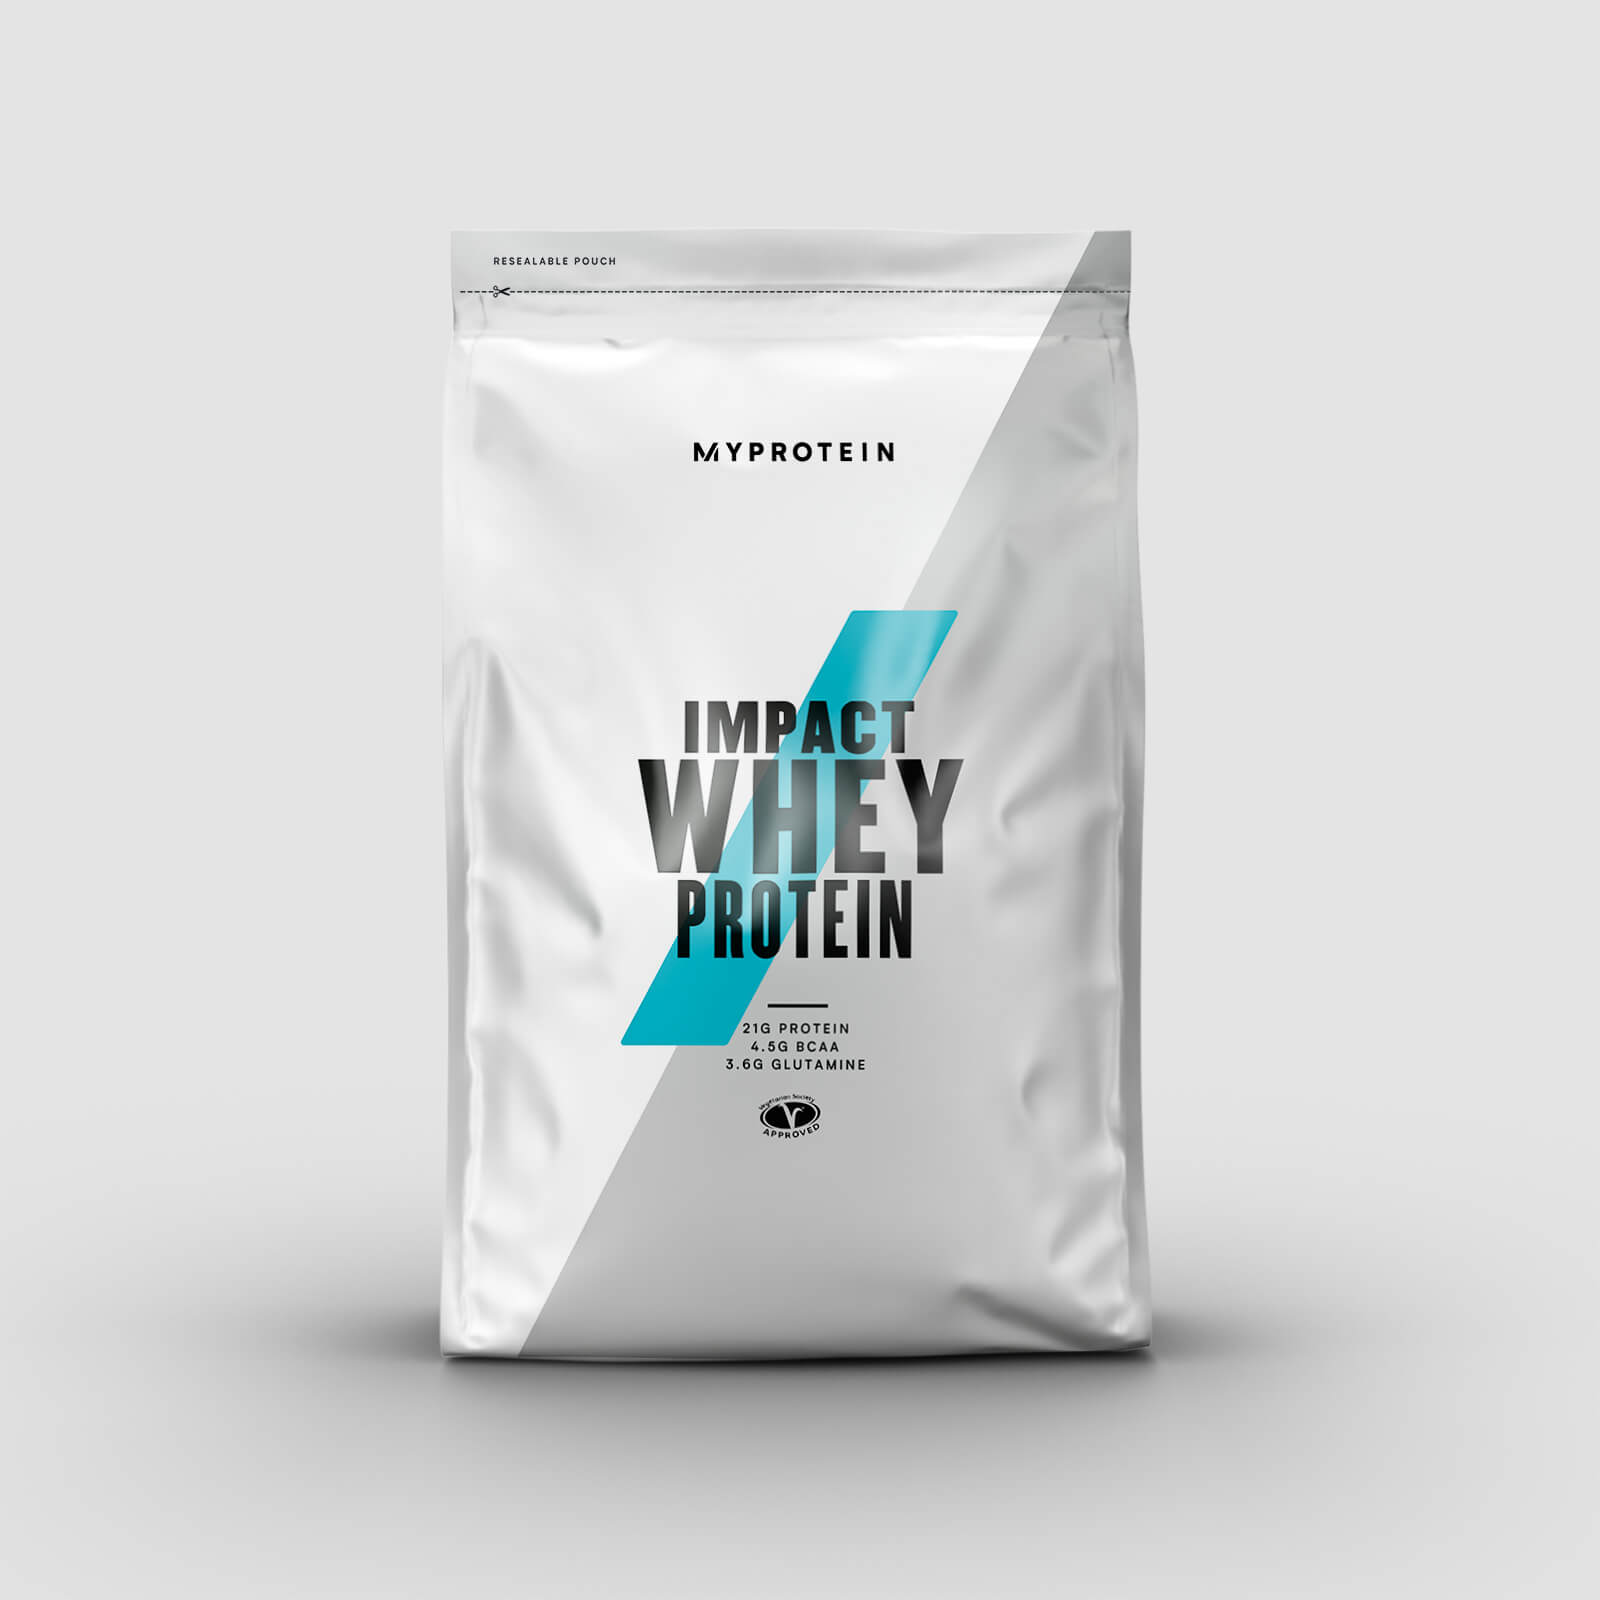 Myprotein Vassleprotein - Impact Whey Protein - 5kg - Natural Banana - New and Improved